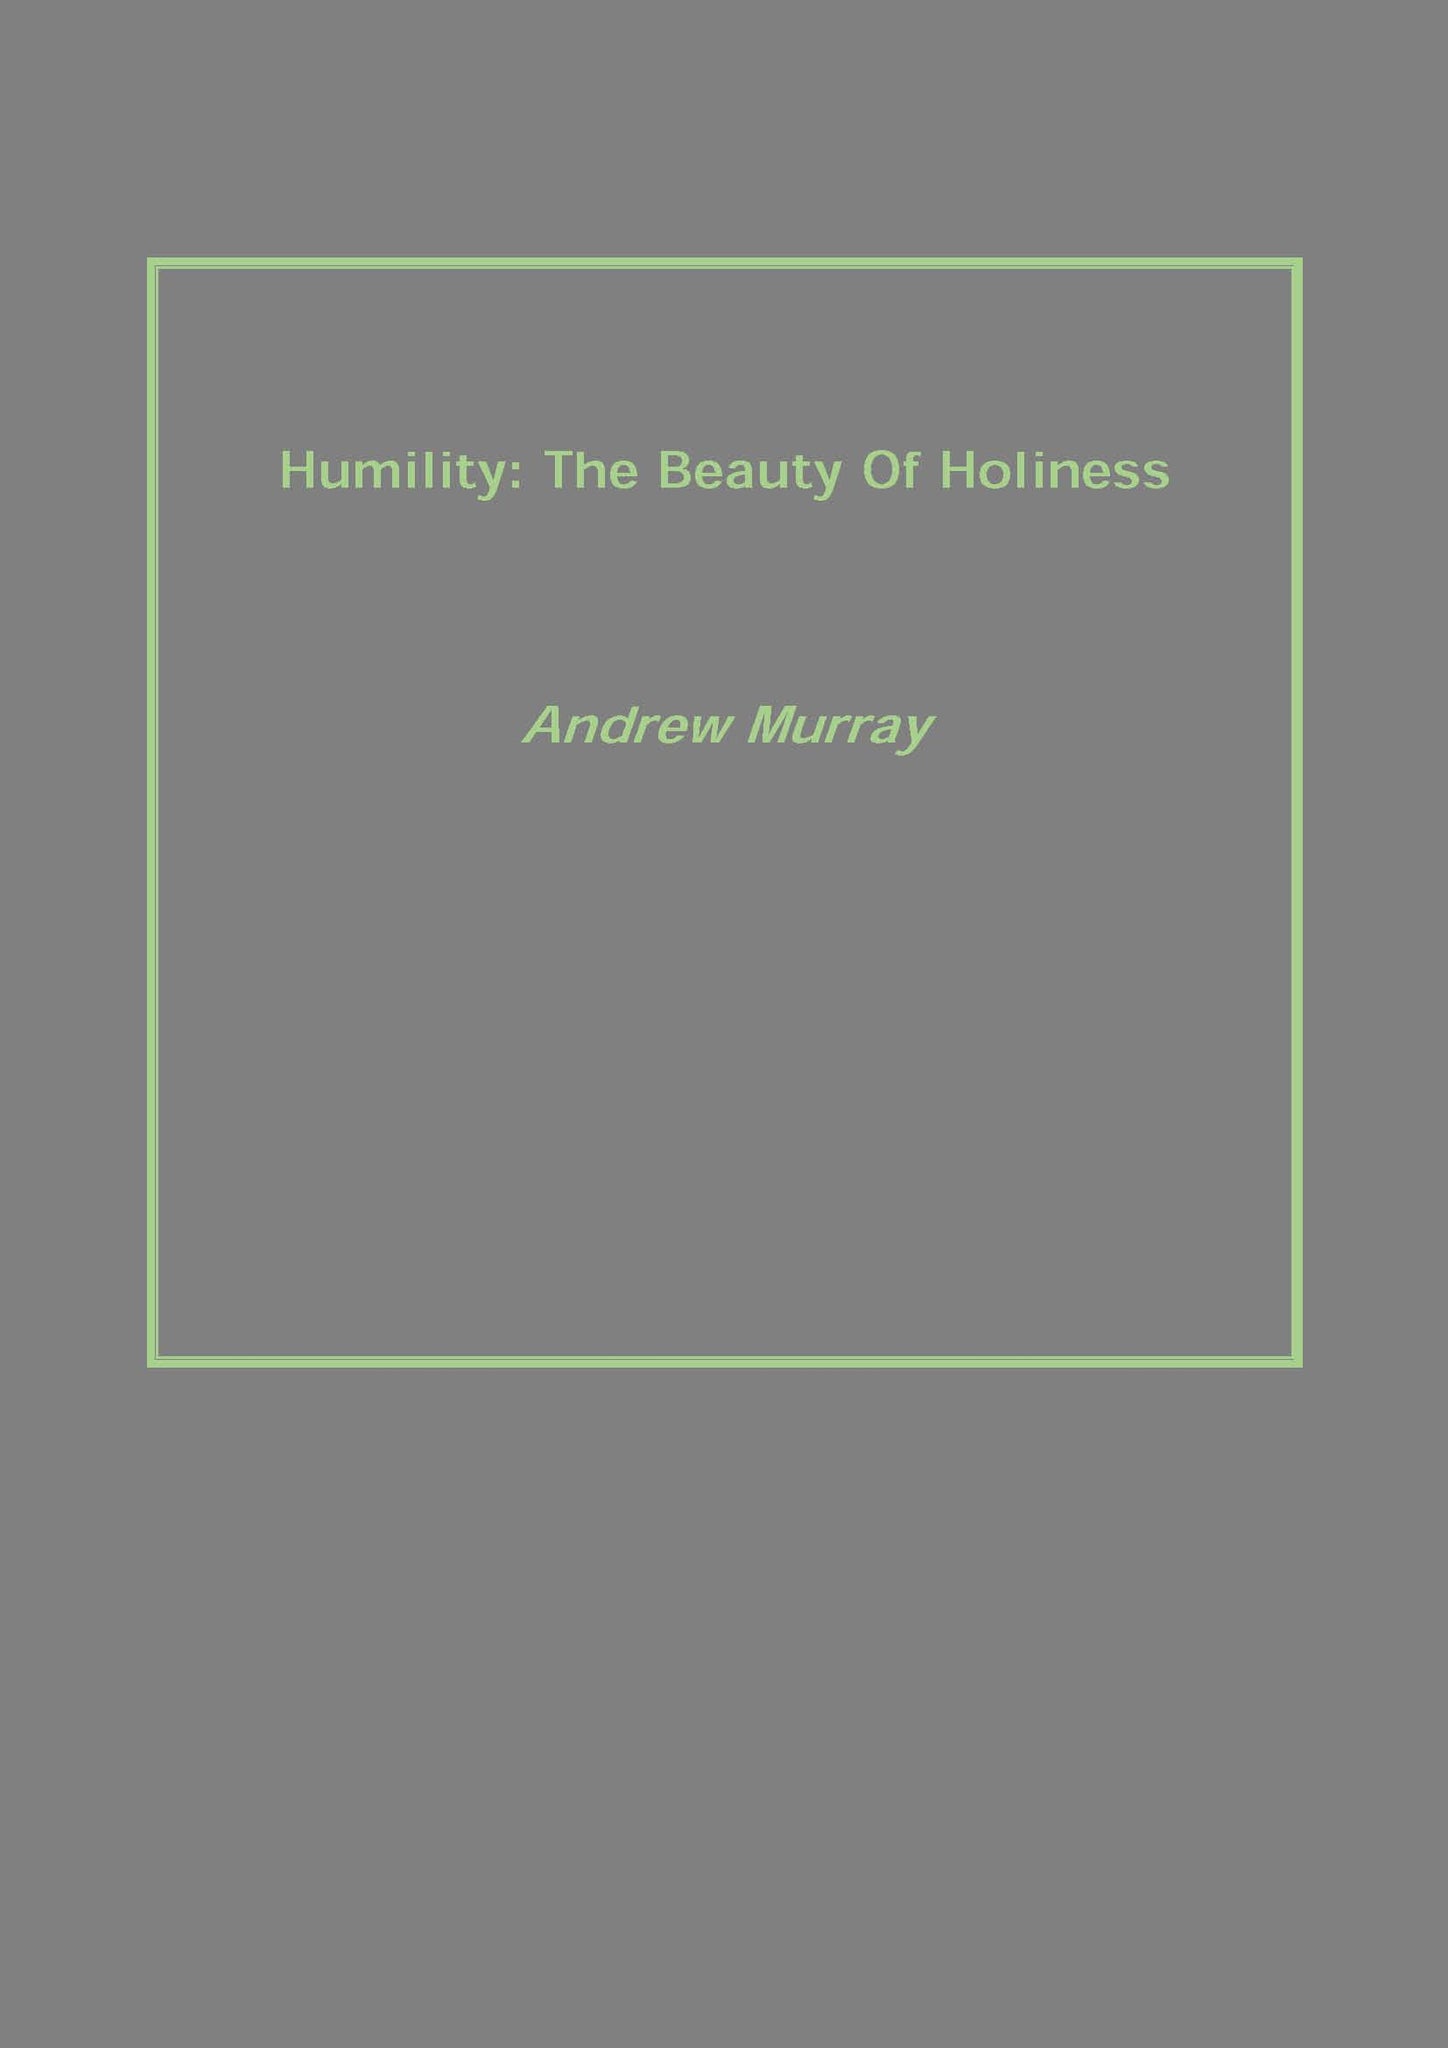 Humility: the Beauty of Holiness